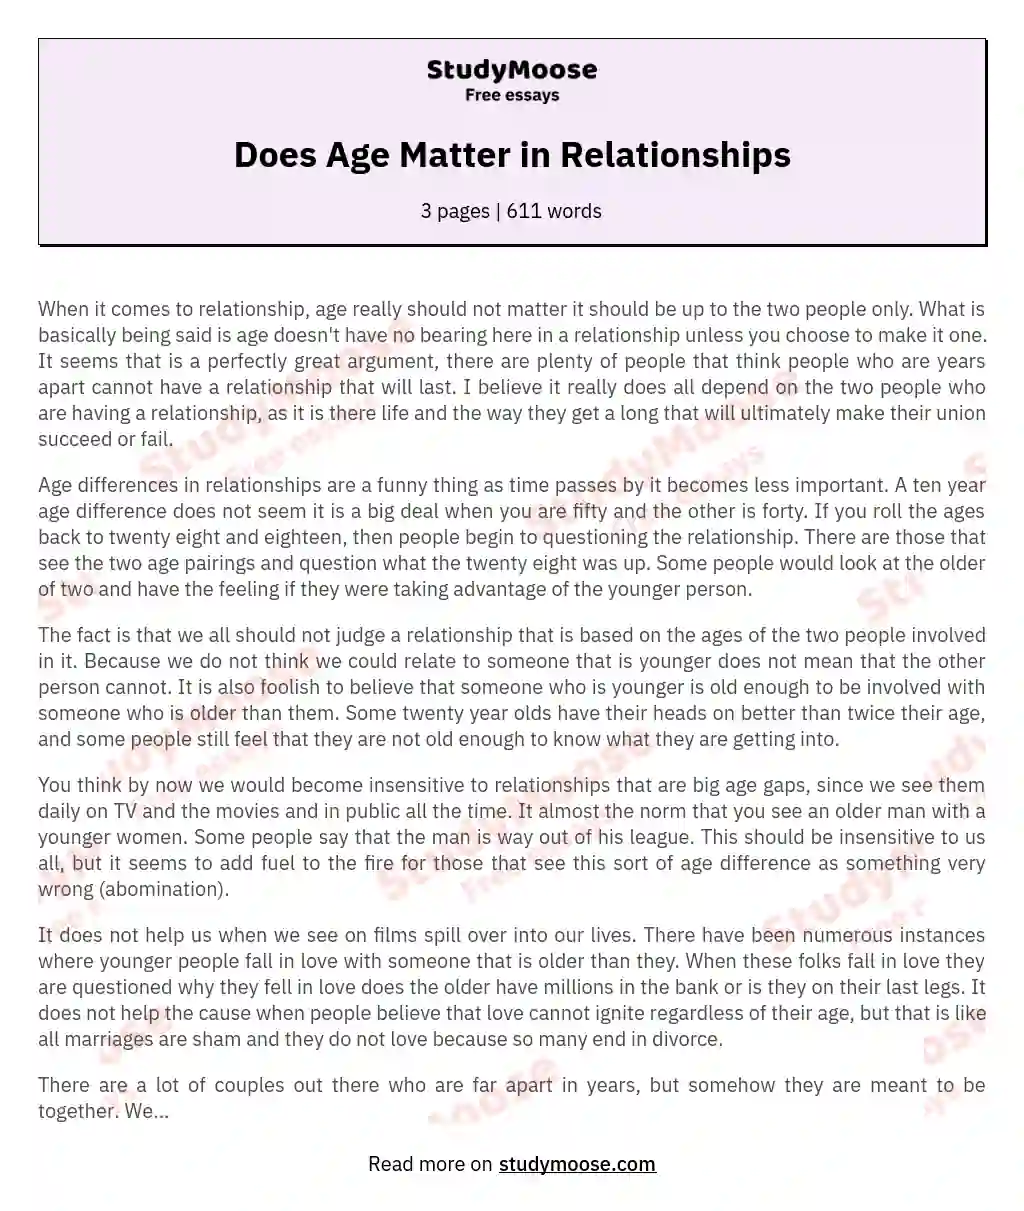 Does Age Matter in Relationships essay